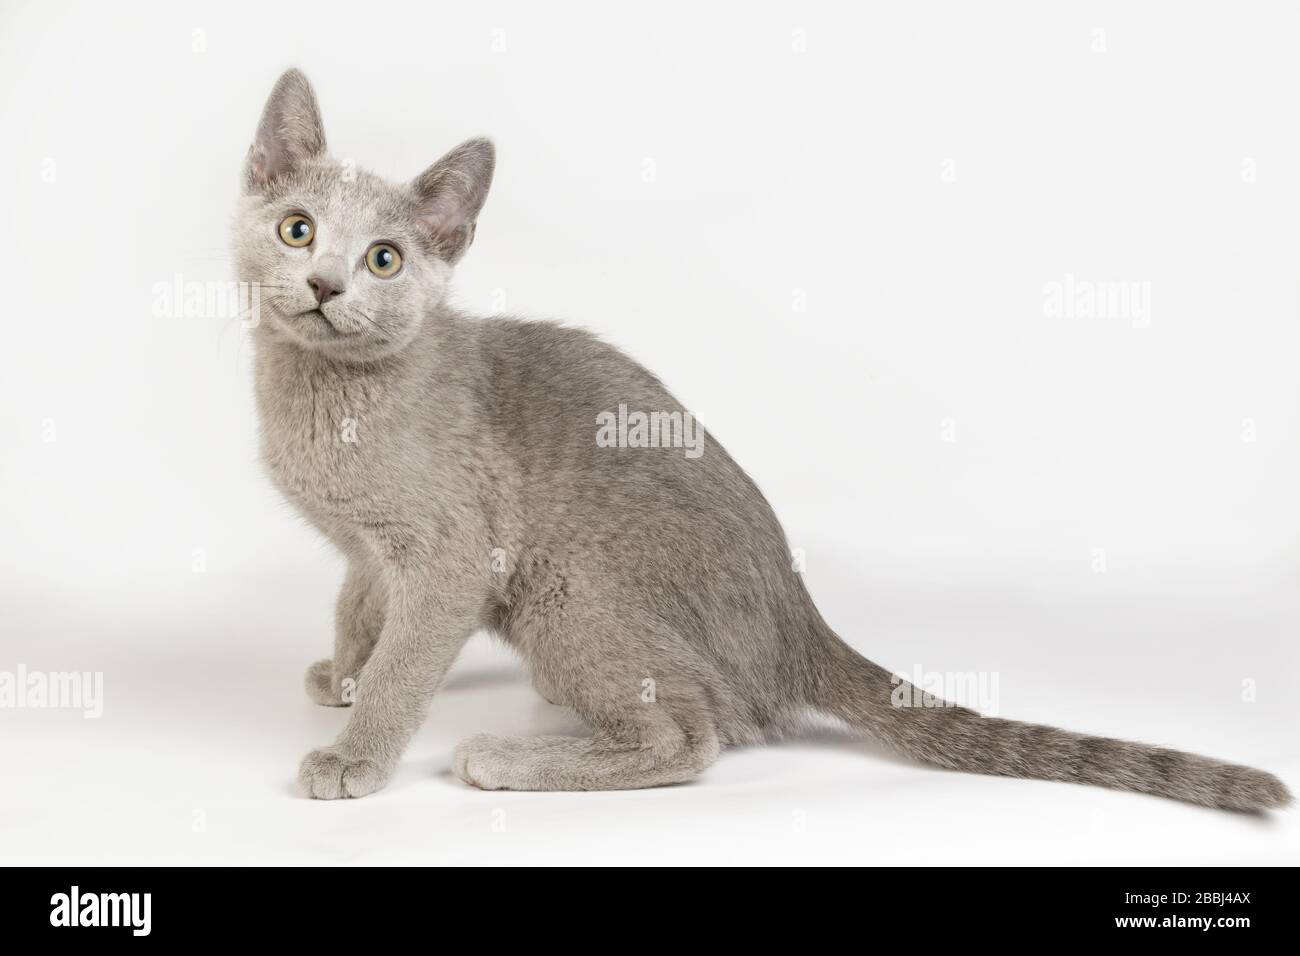 Studio photography of a Russian blue cat on colored backgrounds Stock Photo